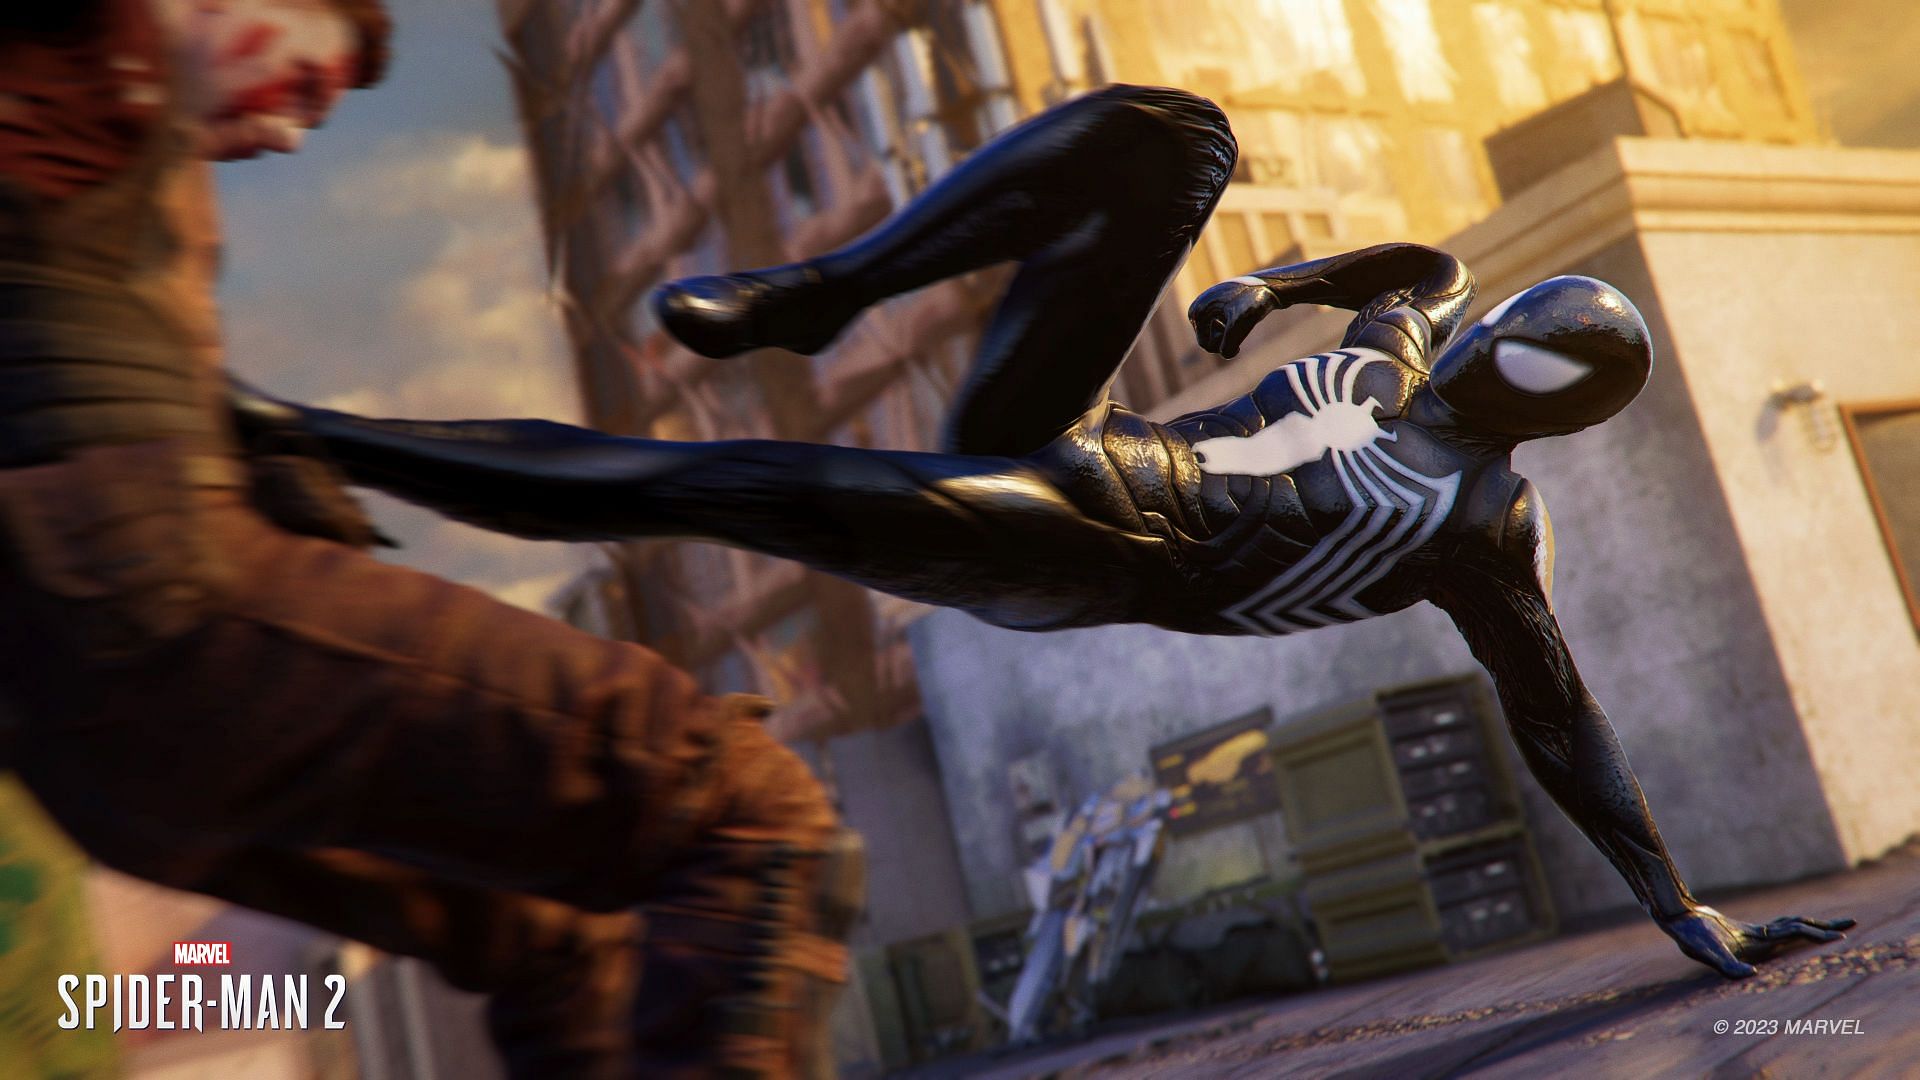 Best Spider-Man 2 missions to replay.